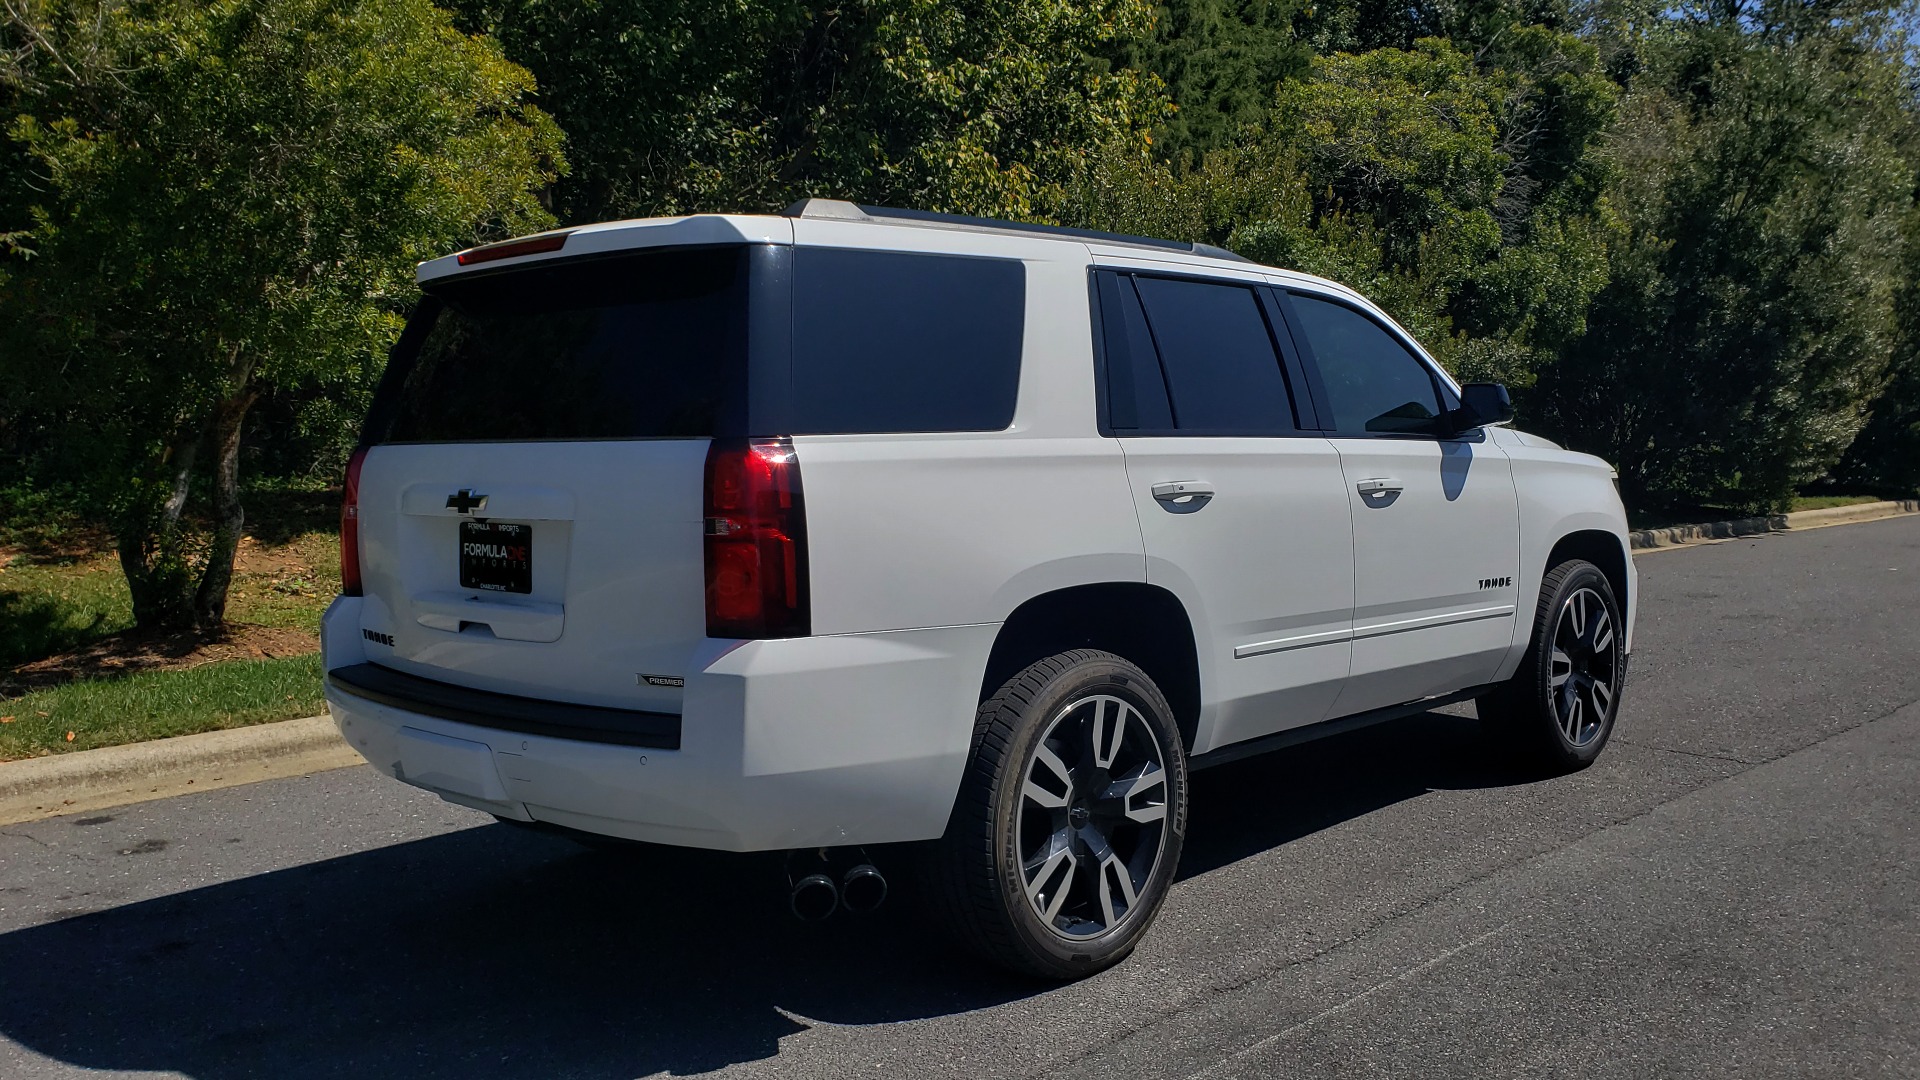 Used 2018 Chevrolet TAHOE PREMIER 4WD / 6.2L V8 / NAV / SUNROOF / ENT / BOSE / 3-ROW / REARVIEW for sale Sold at Formula Imports in Charlotte NC 28227 2